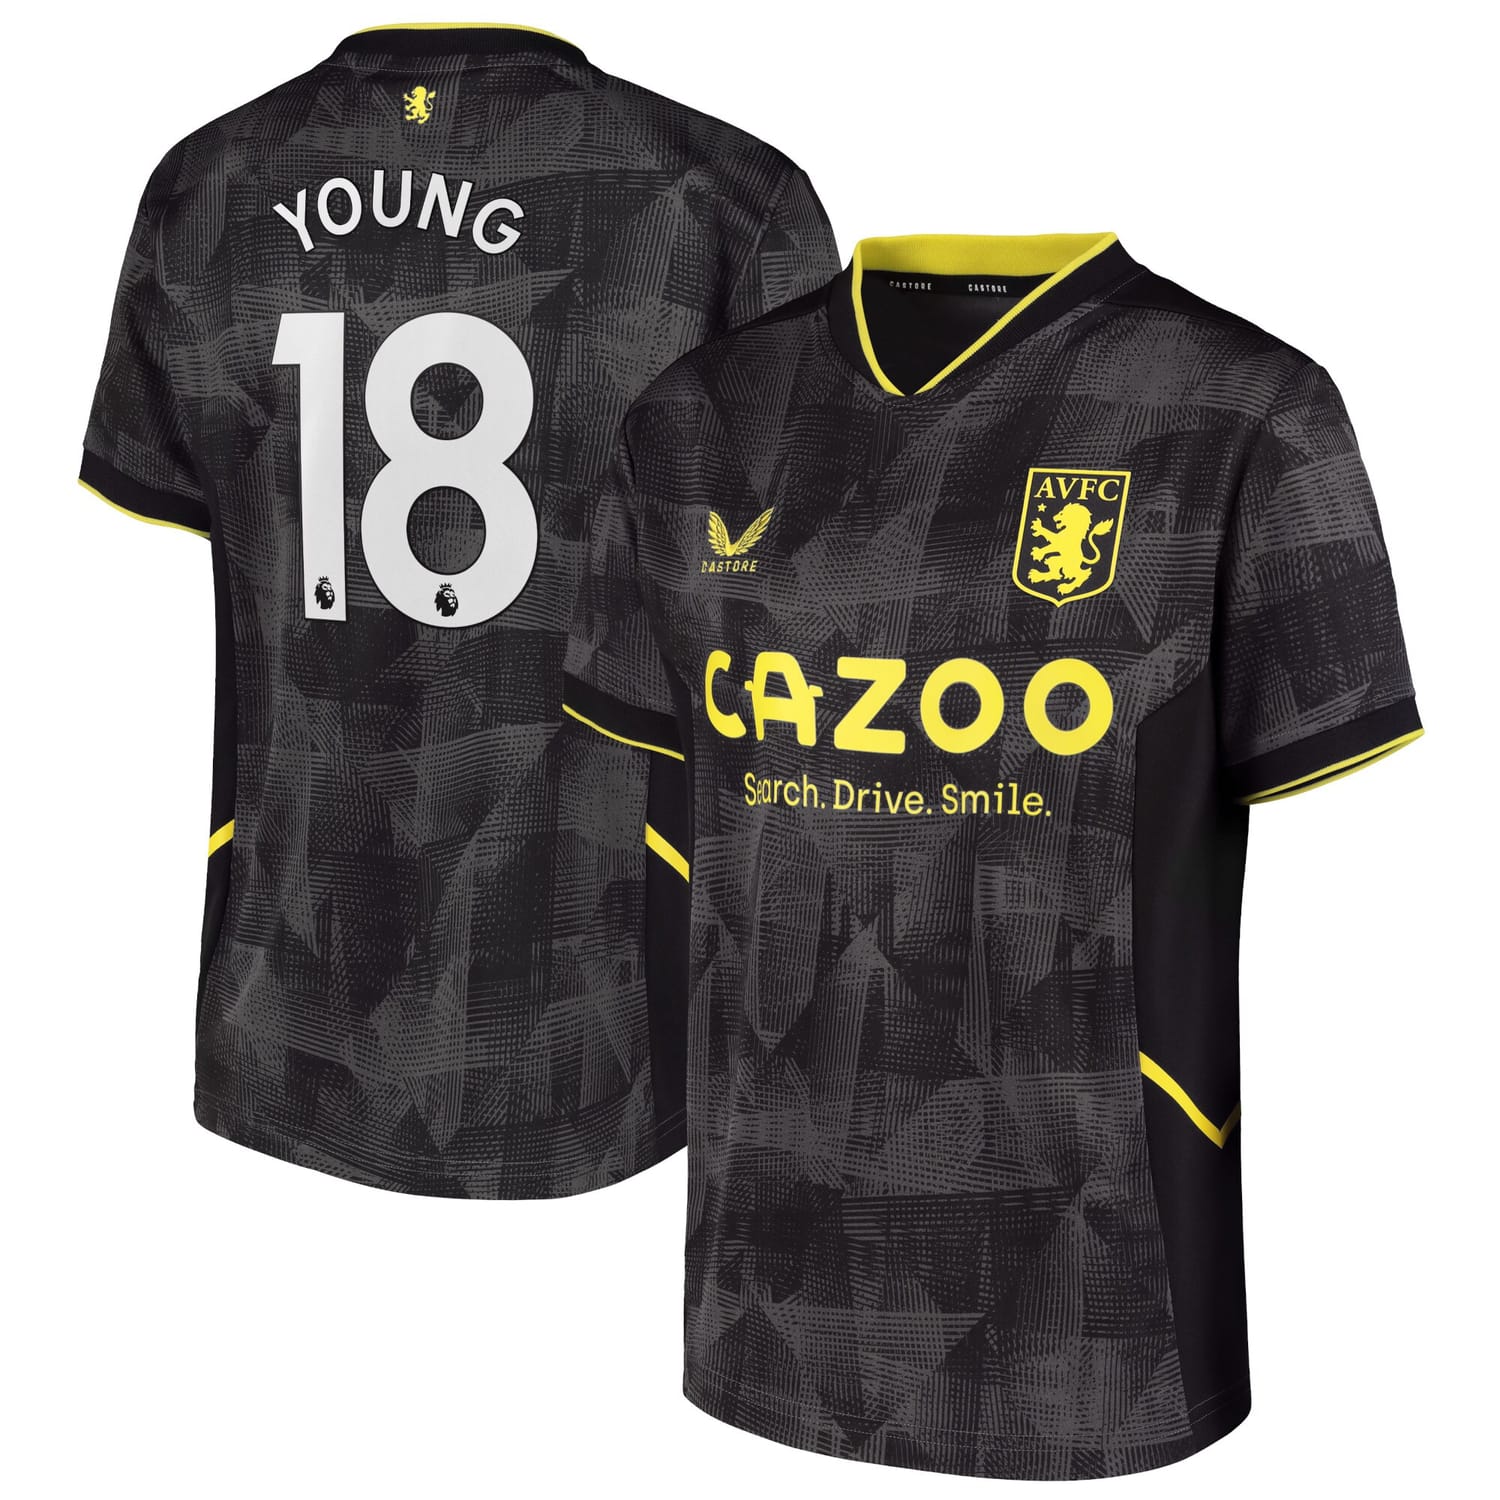 Premier League Ast. Villa Third Jersey Shirt 2022-23 player Ashley Young 18 printing for Men